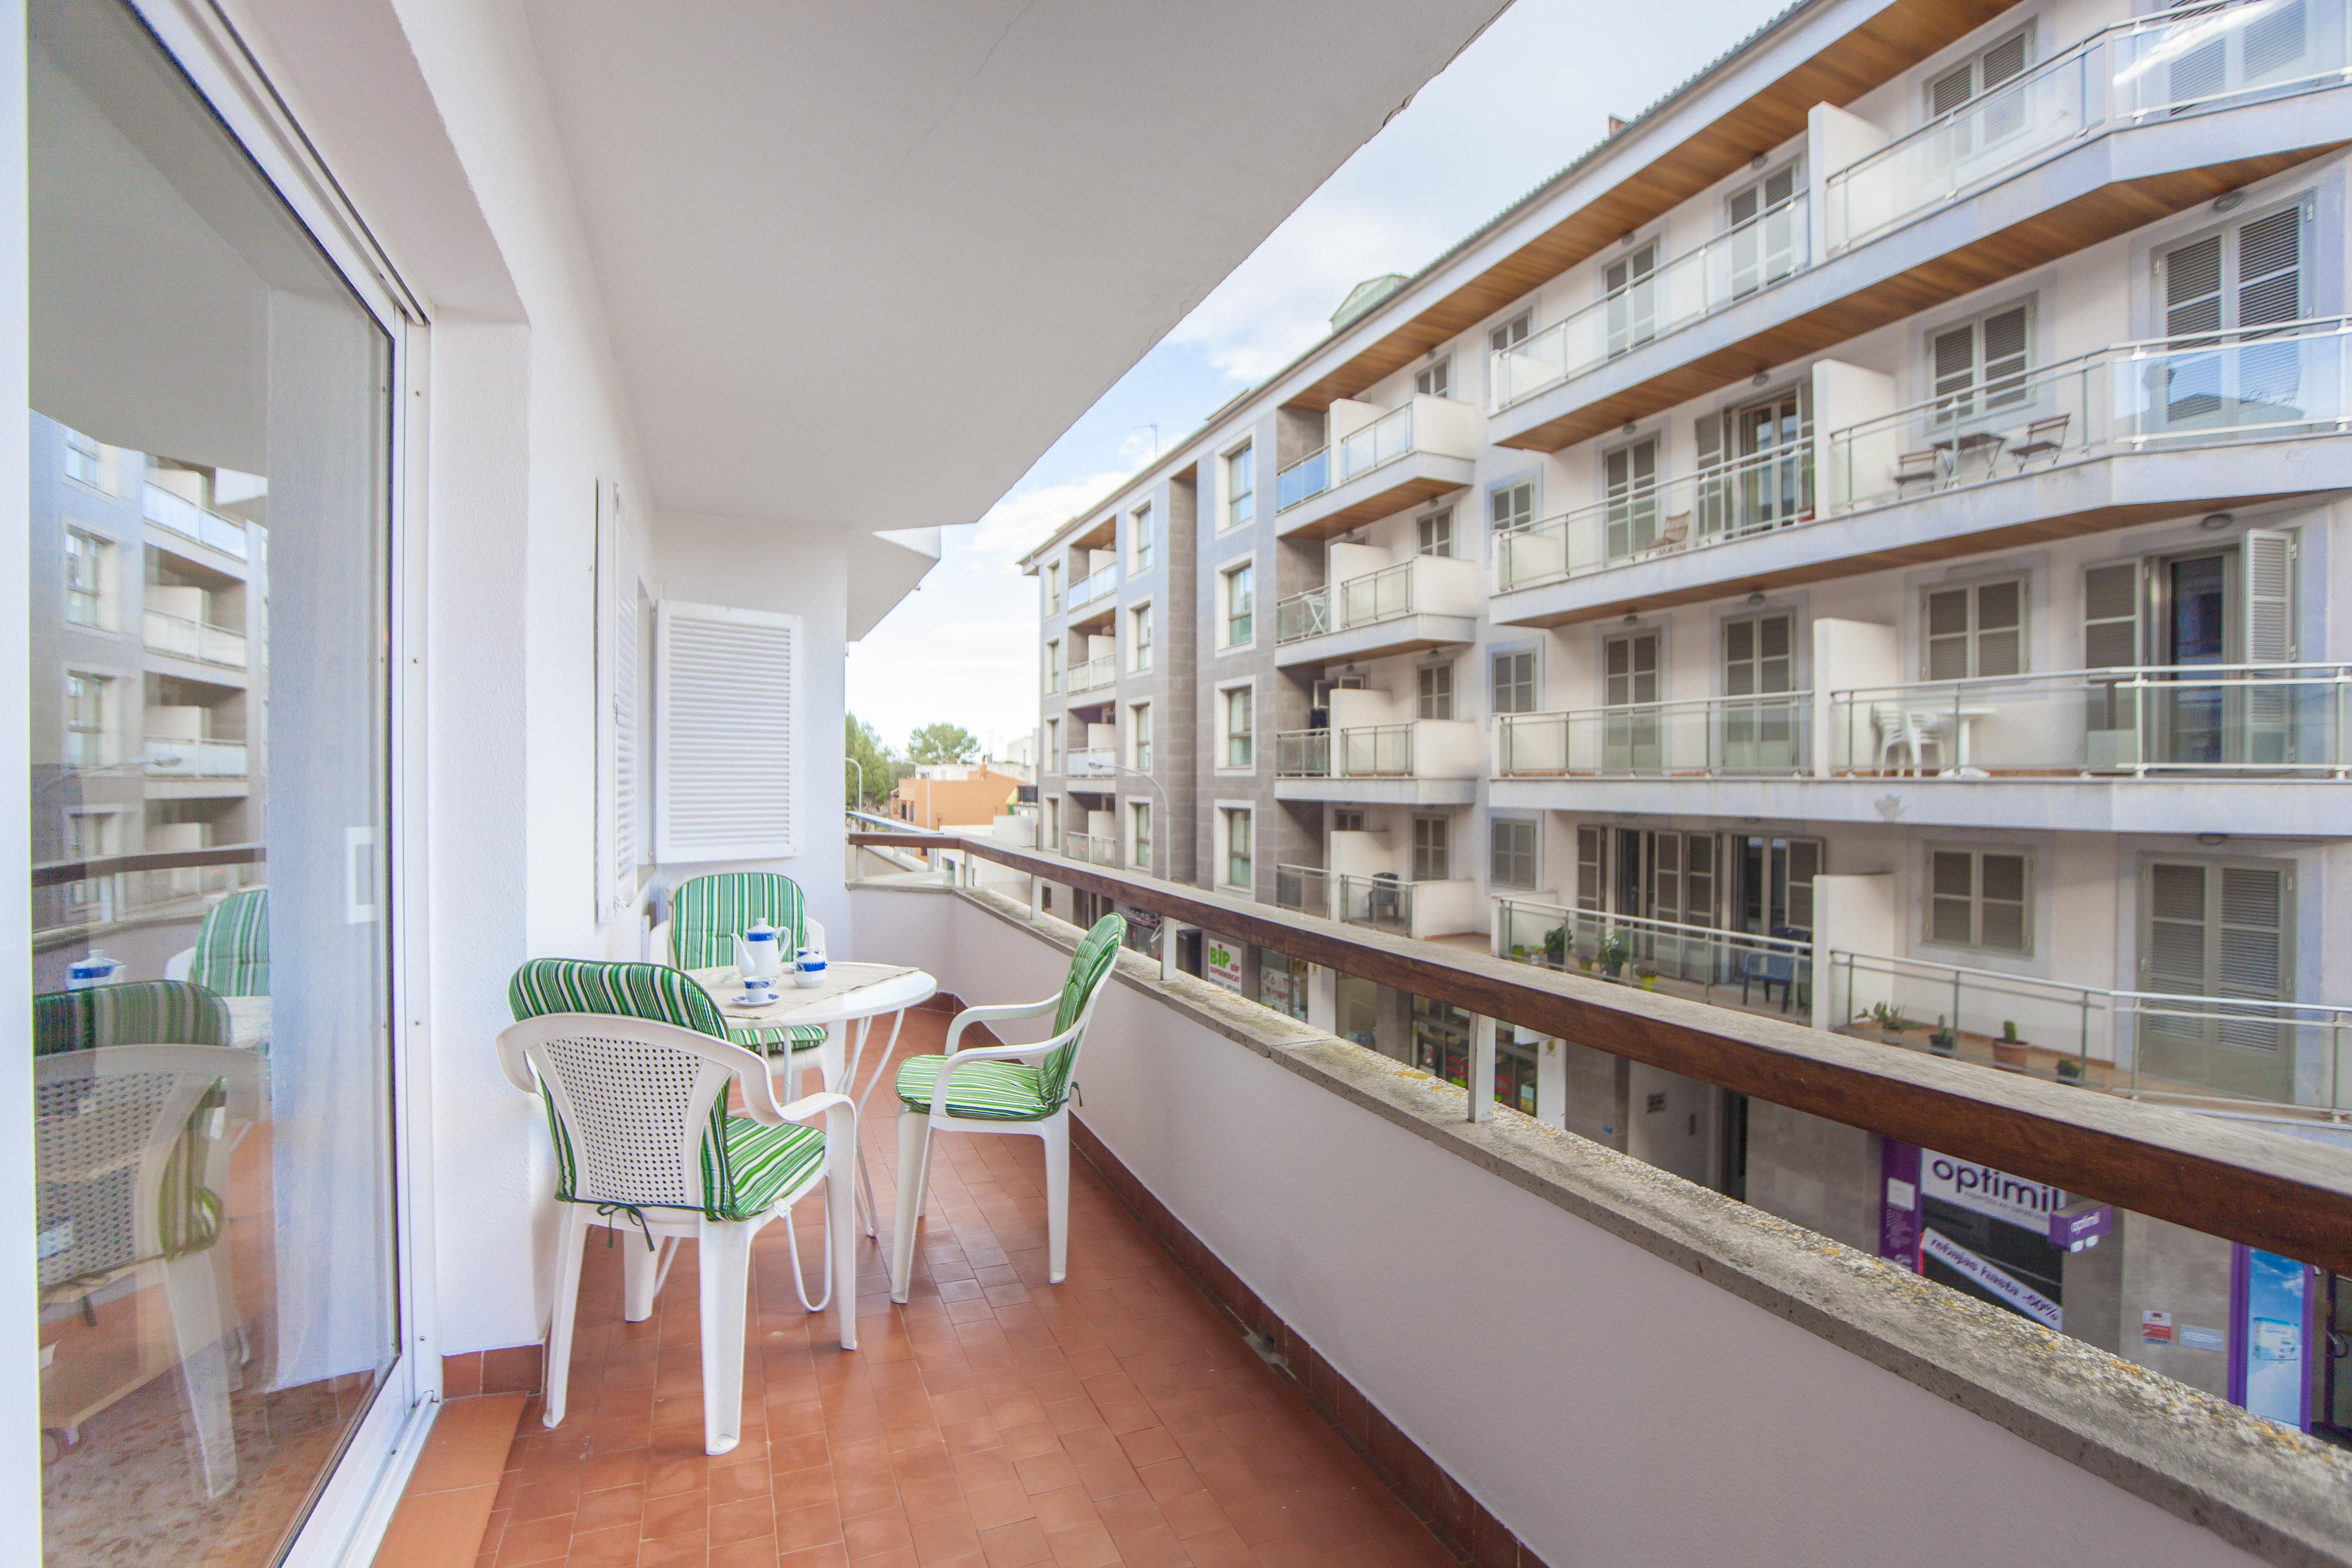 Property Image 1 - CURLING - Apartment with terrace near the beach. Free WiFi